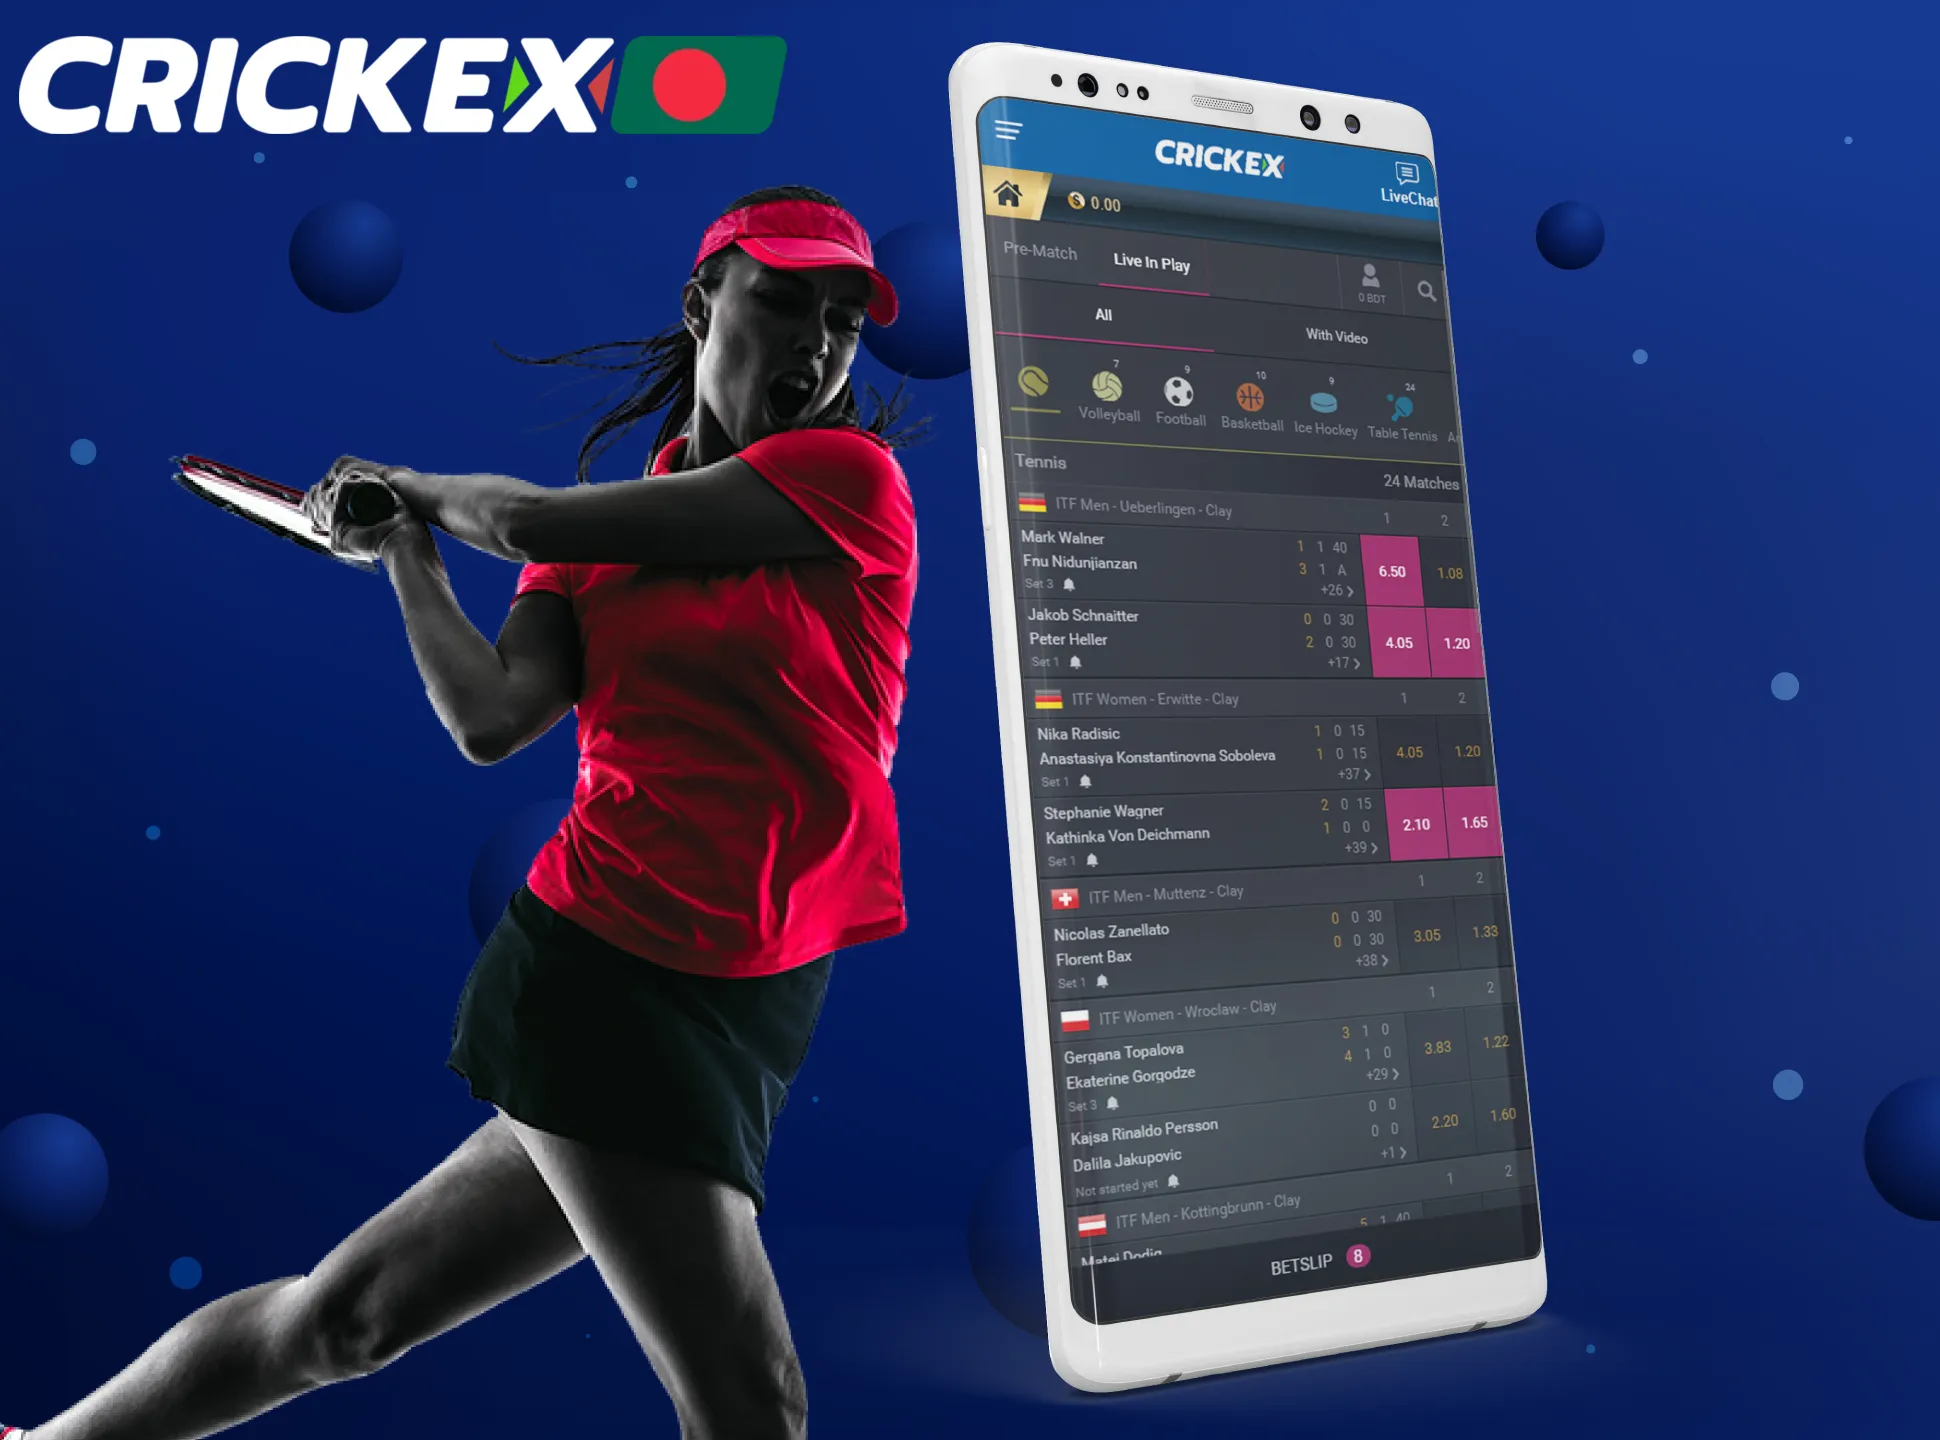 Make bets on tennis matches in the Crickex app.